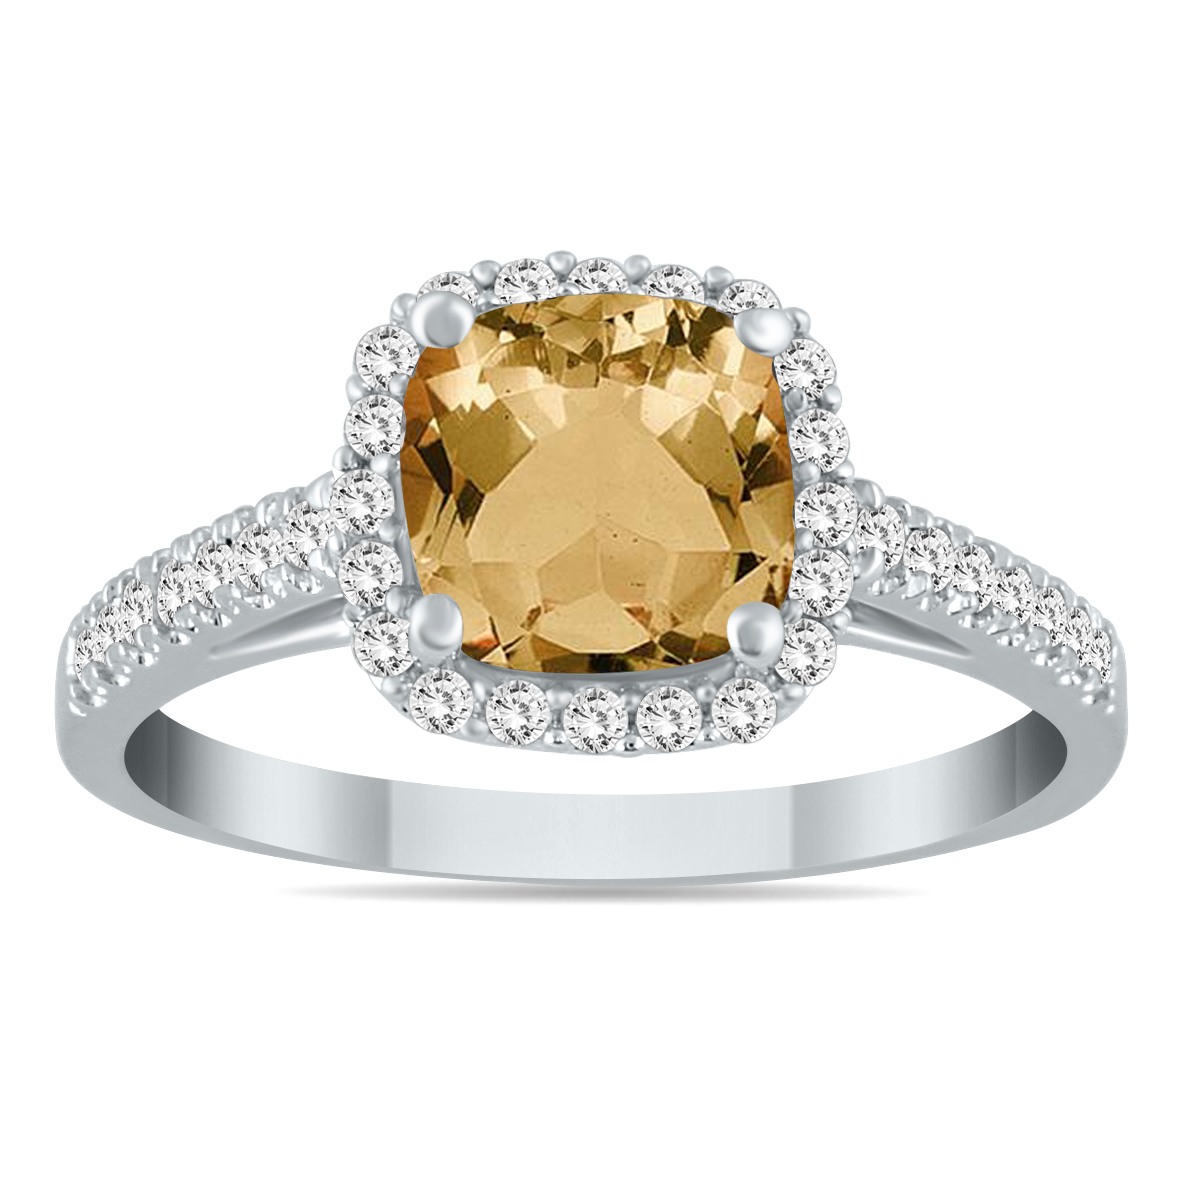 5MM Cushion Cut Citrine and Diamond Halo Ring in 10K White Gold